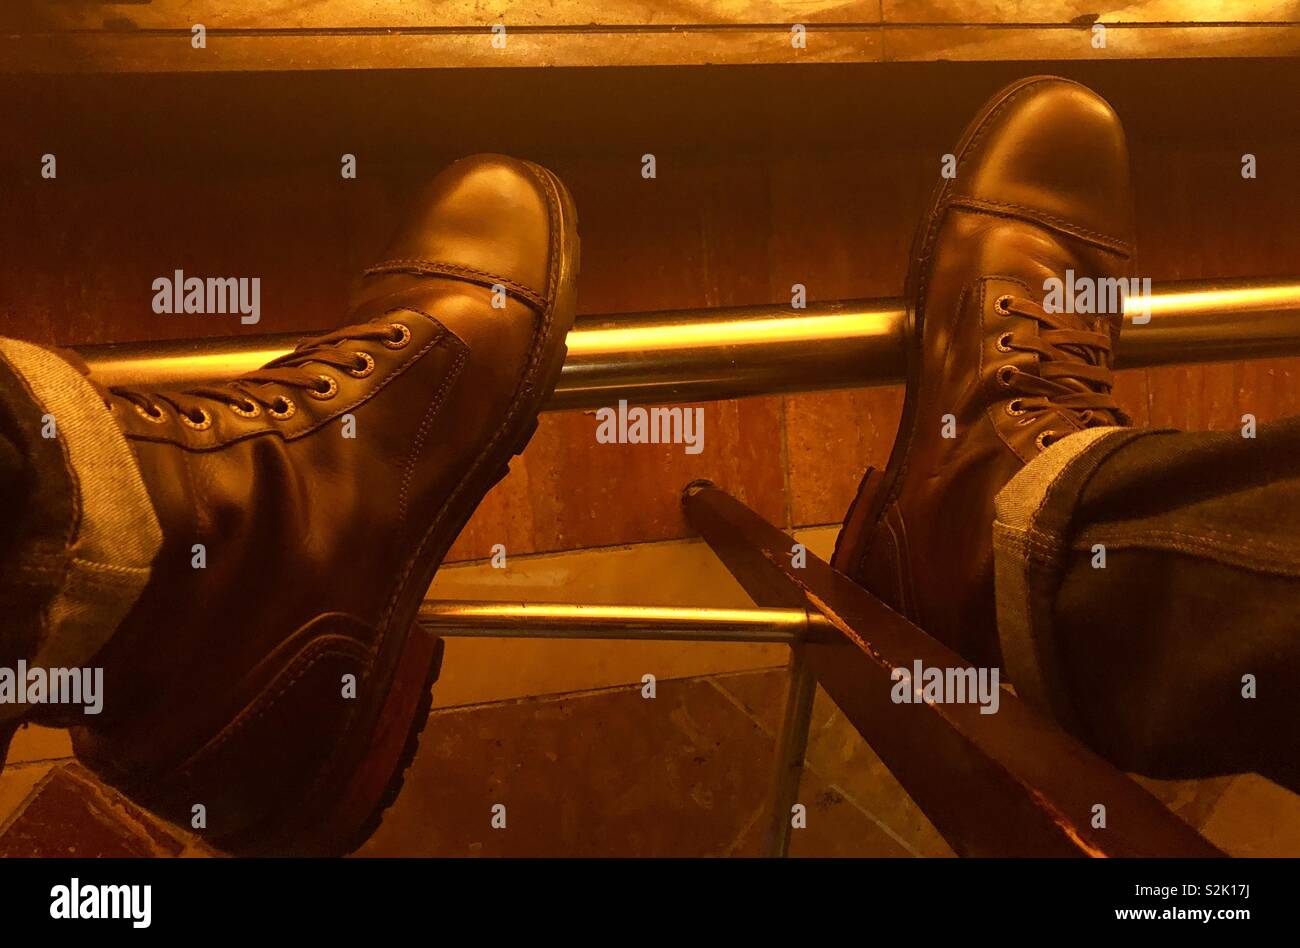 Boots at bar Stock Photo - Alamy